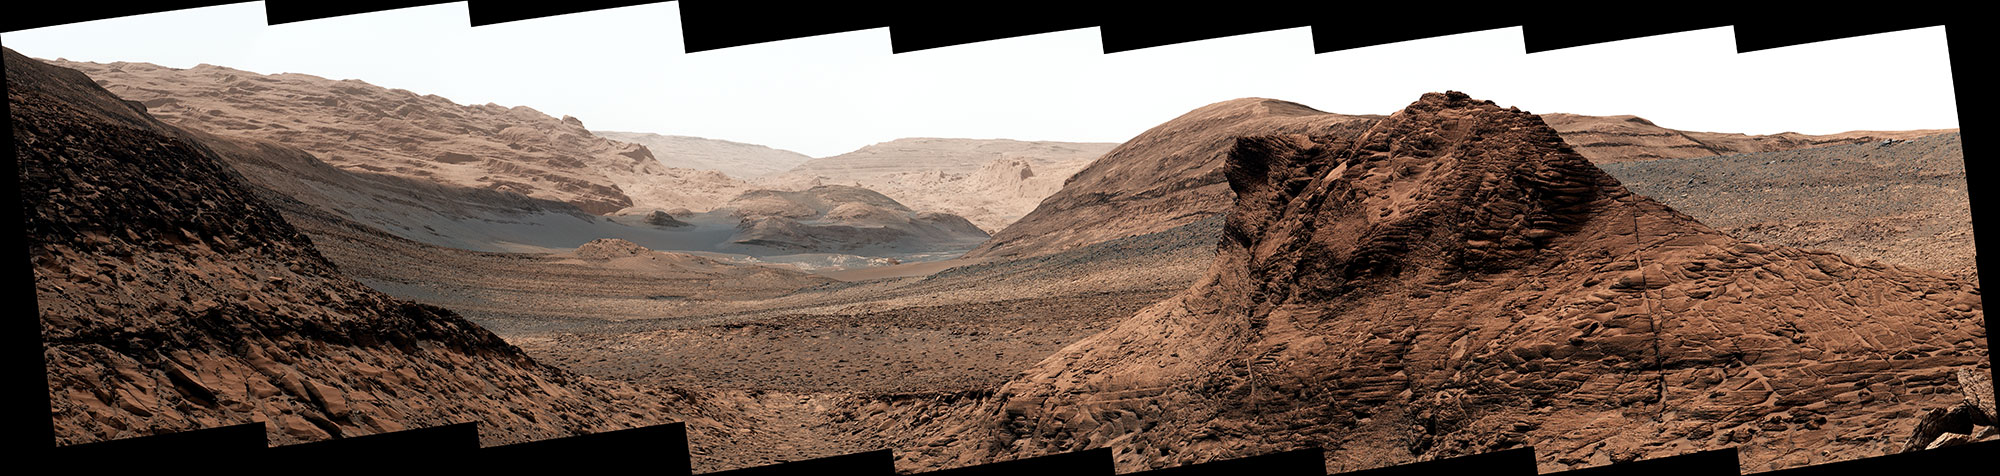 At the bottom of this valley, called Gediz Vallis, is a mound of boulders and debris 